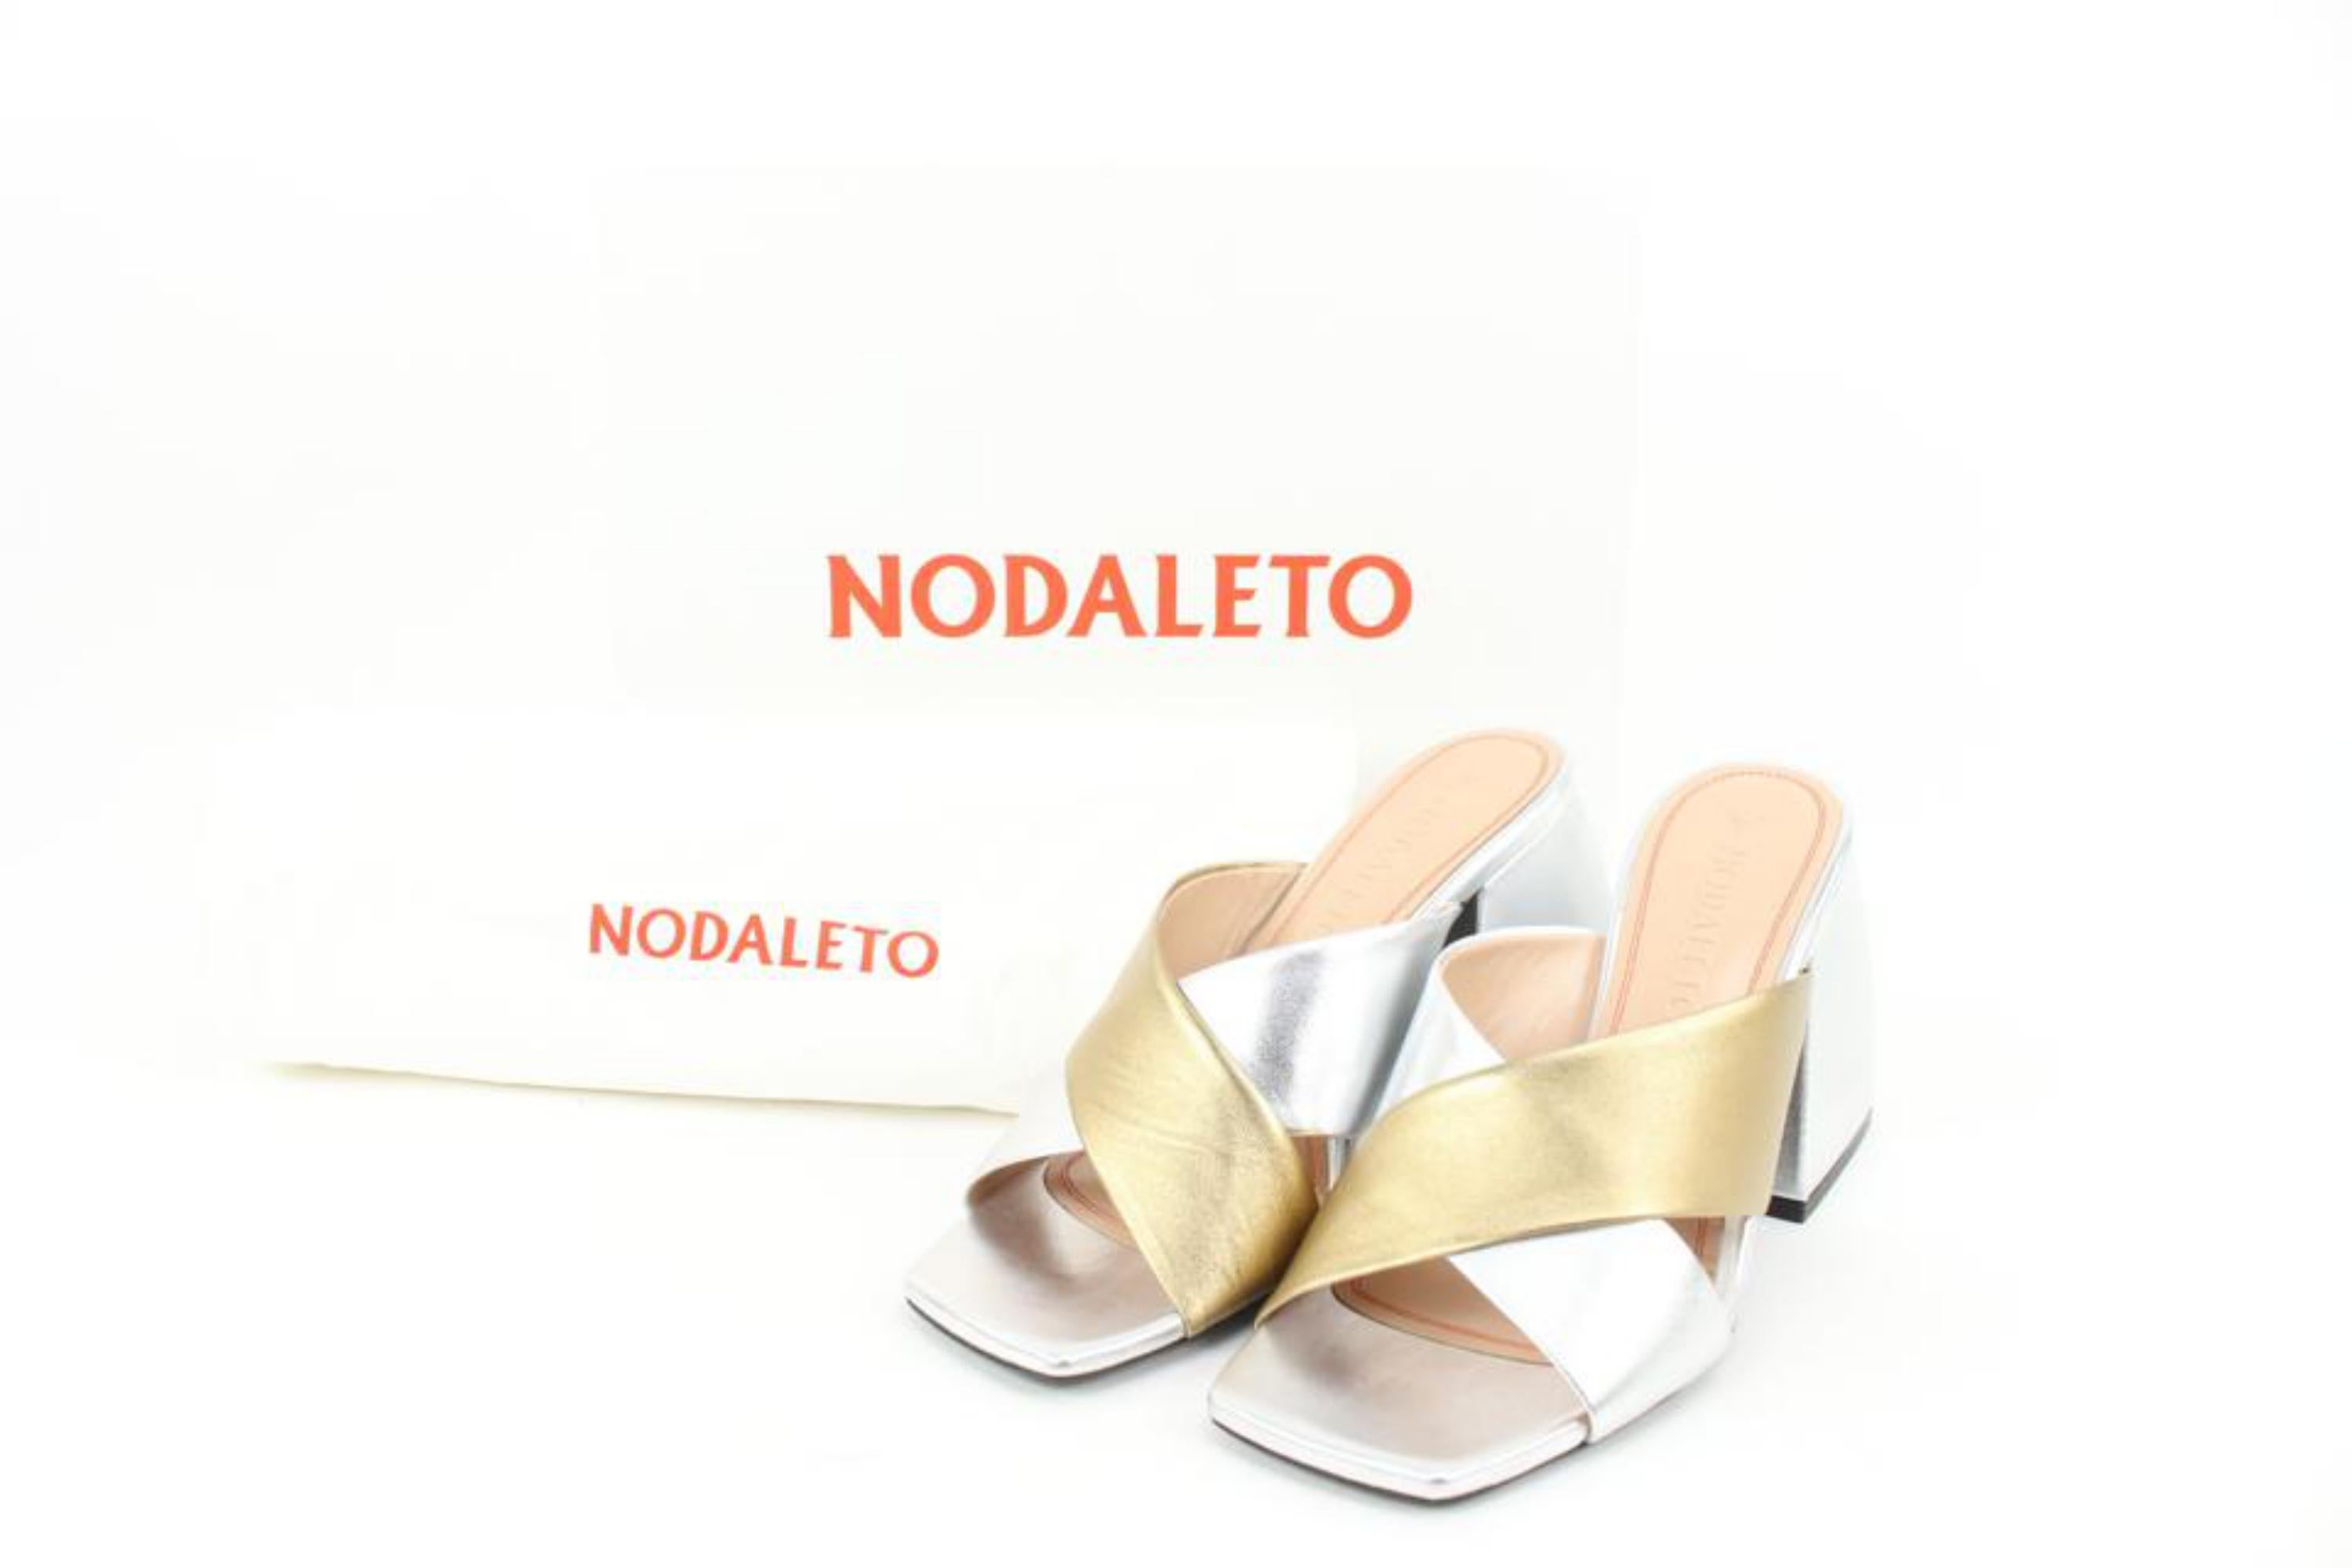 Nodaleto Size 40 Silver x Gold Leather Bulla Banks Block Heel Sandals 43n321s
Made In: Venice
Measurements: Length:  9.75